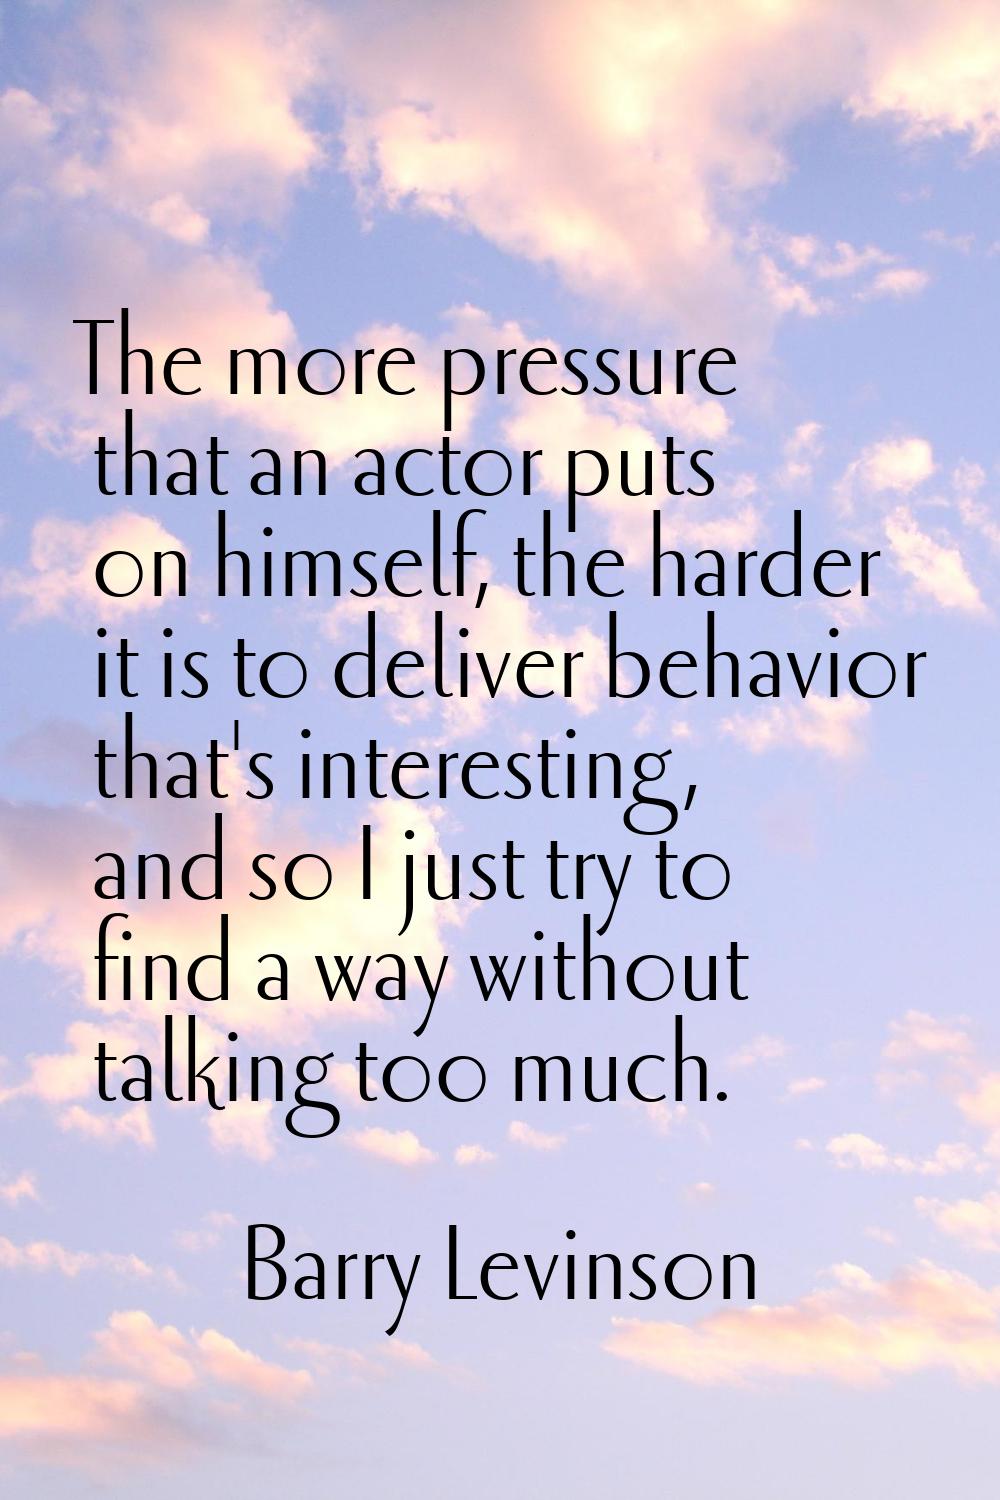 The more pressure that an actor puts on himself, the harder it is to deliver behavior that's intere